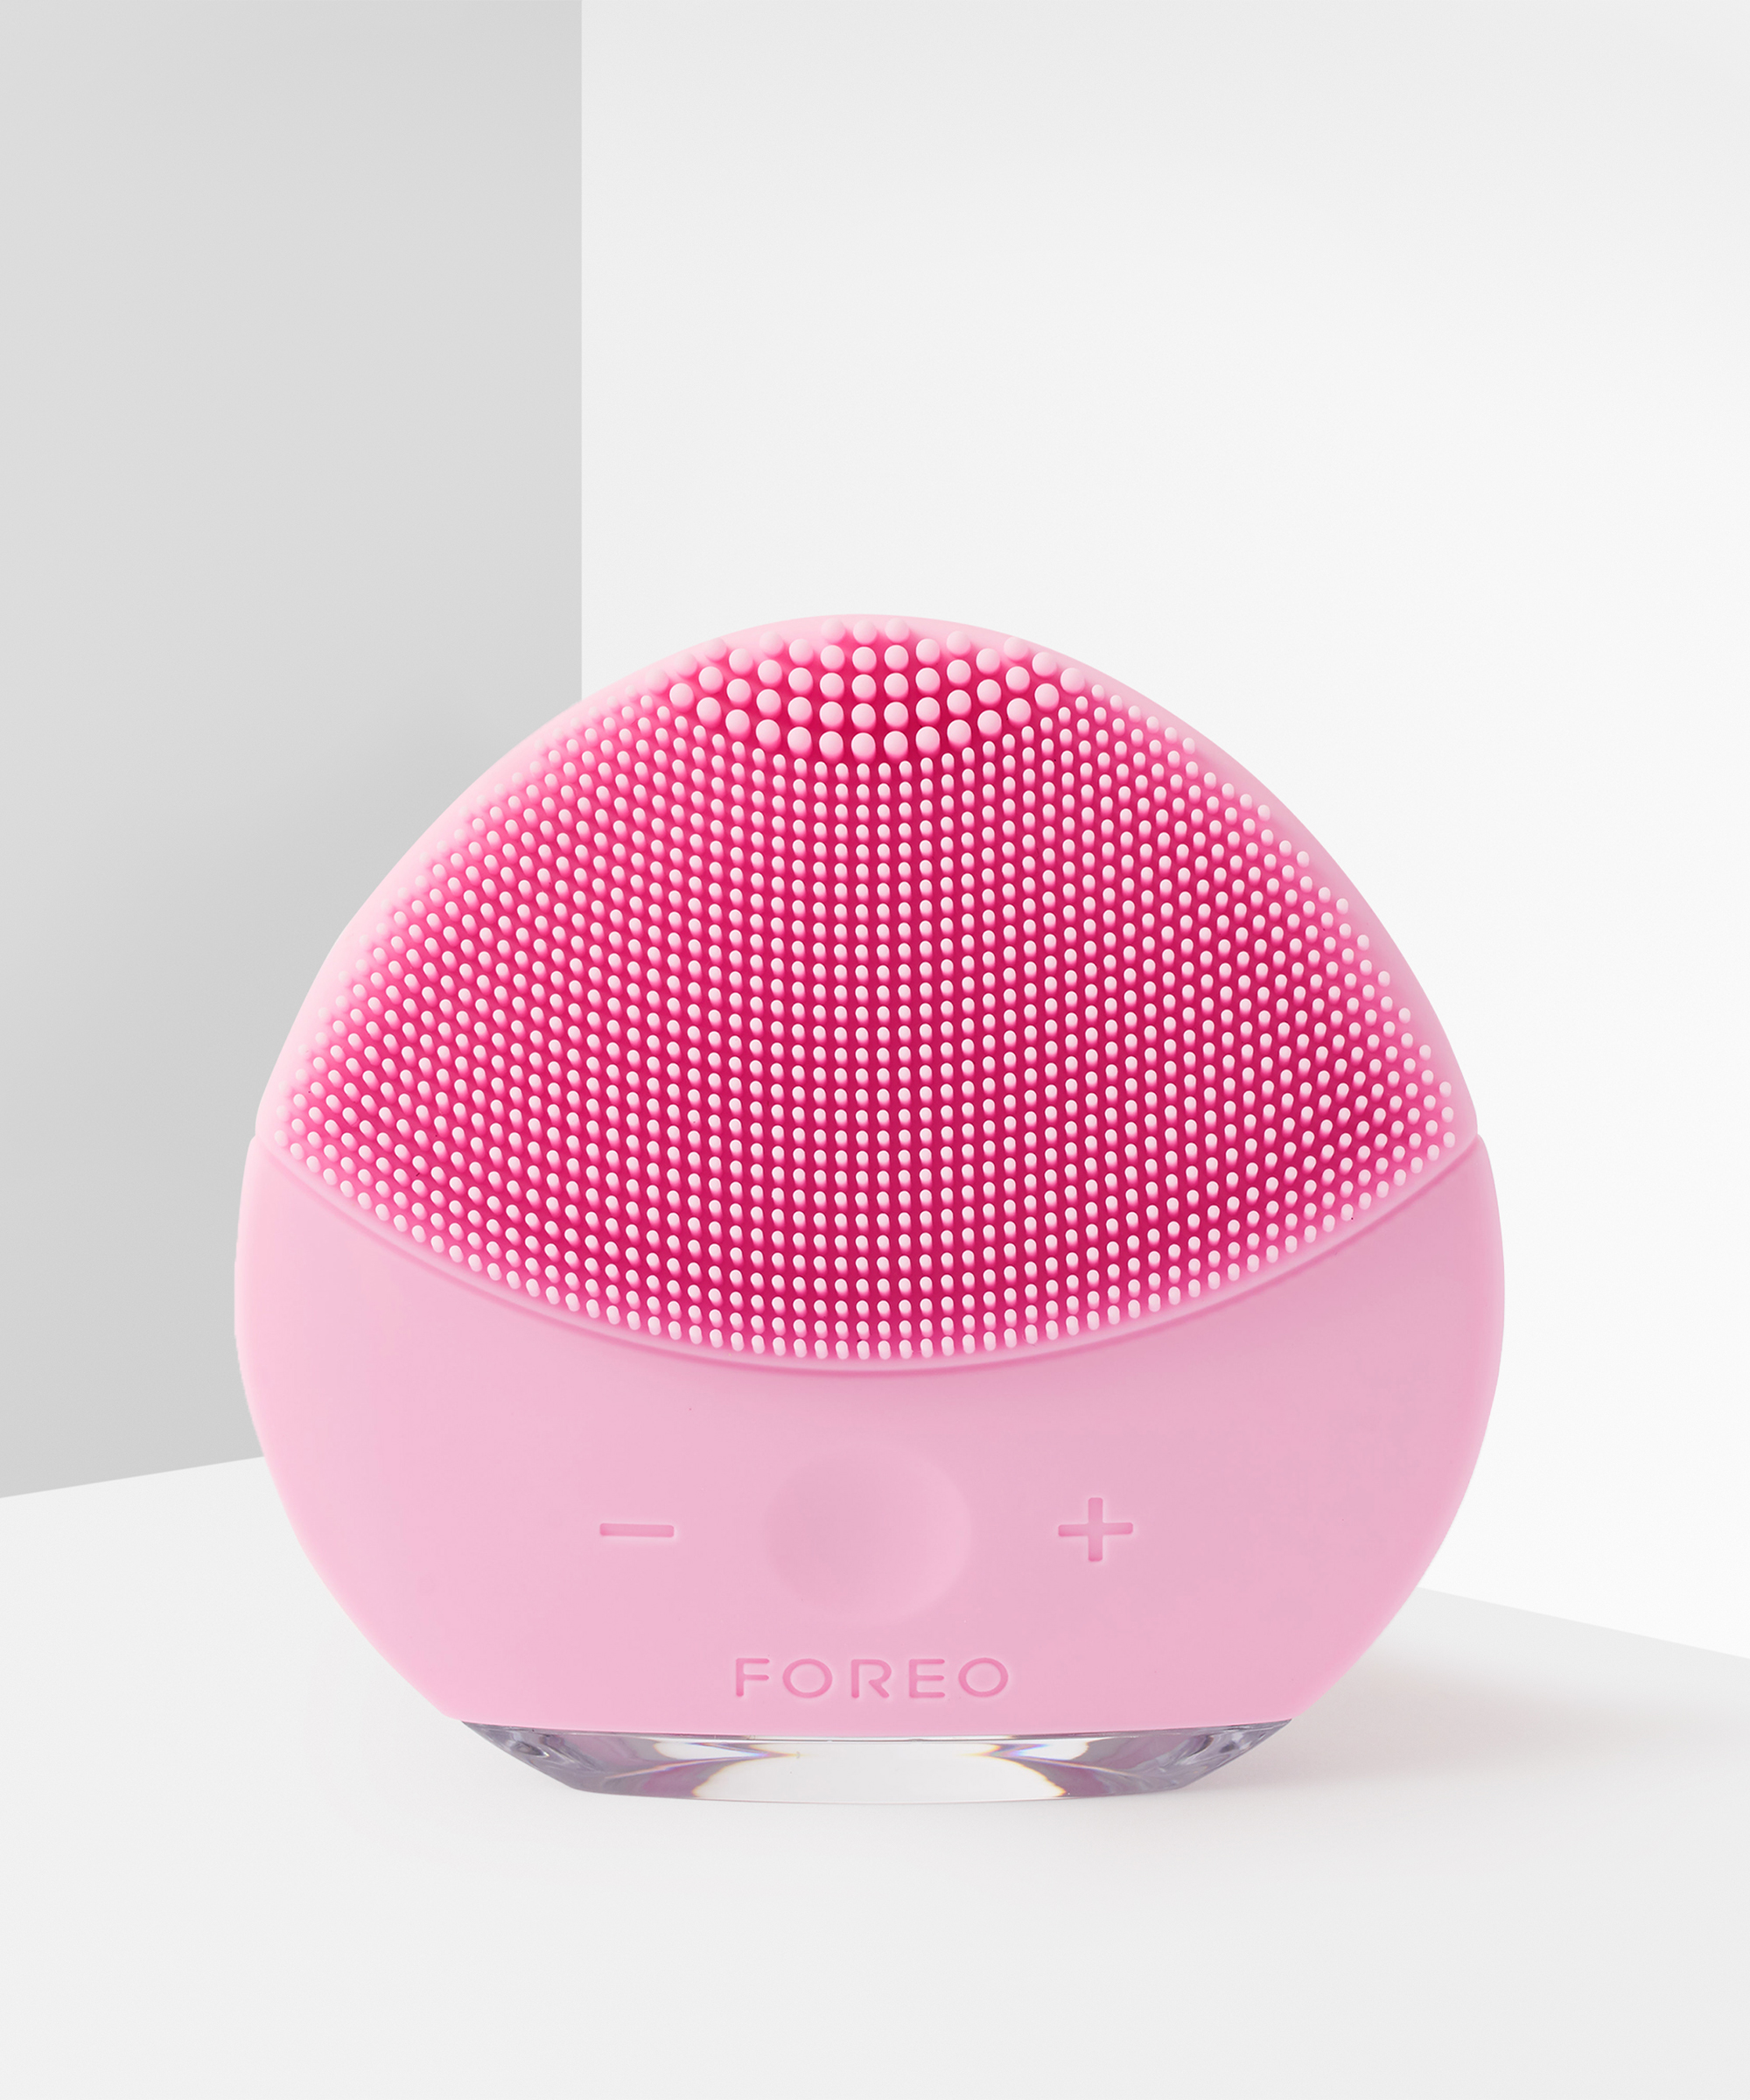 Dual-Sided 2 For Skin Face All Types BAY Brush at BEAUTY Foreo LUNA™ Mini